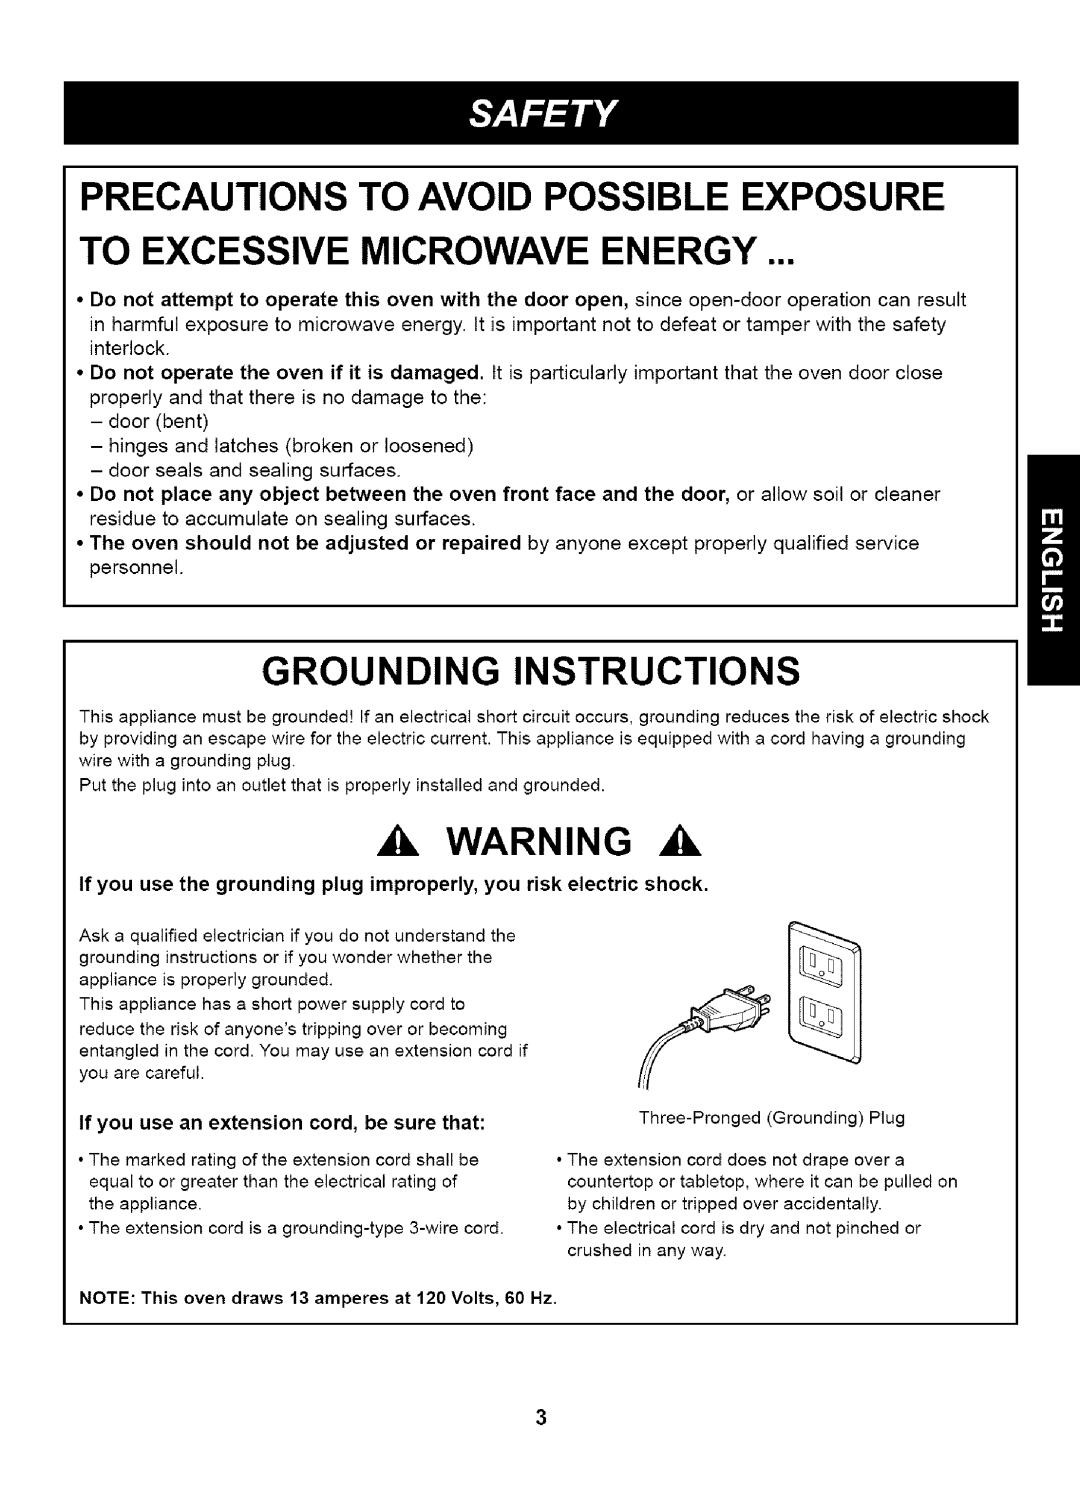 Kenmore 721.61283 manual Precautions To Avoid Possible Exposure, To Excessive Microwave Energy, Grounding Instructions 